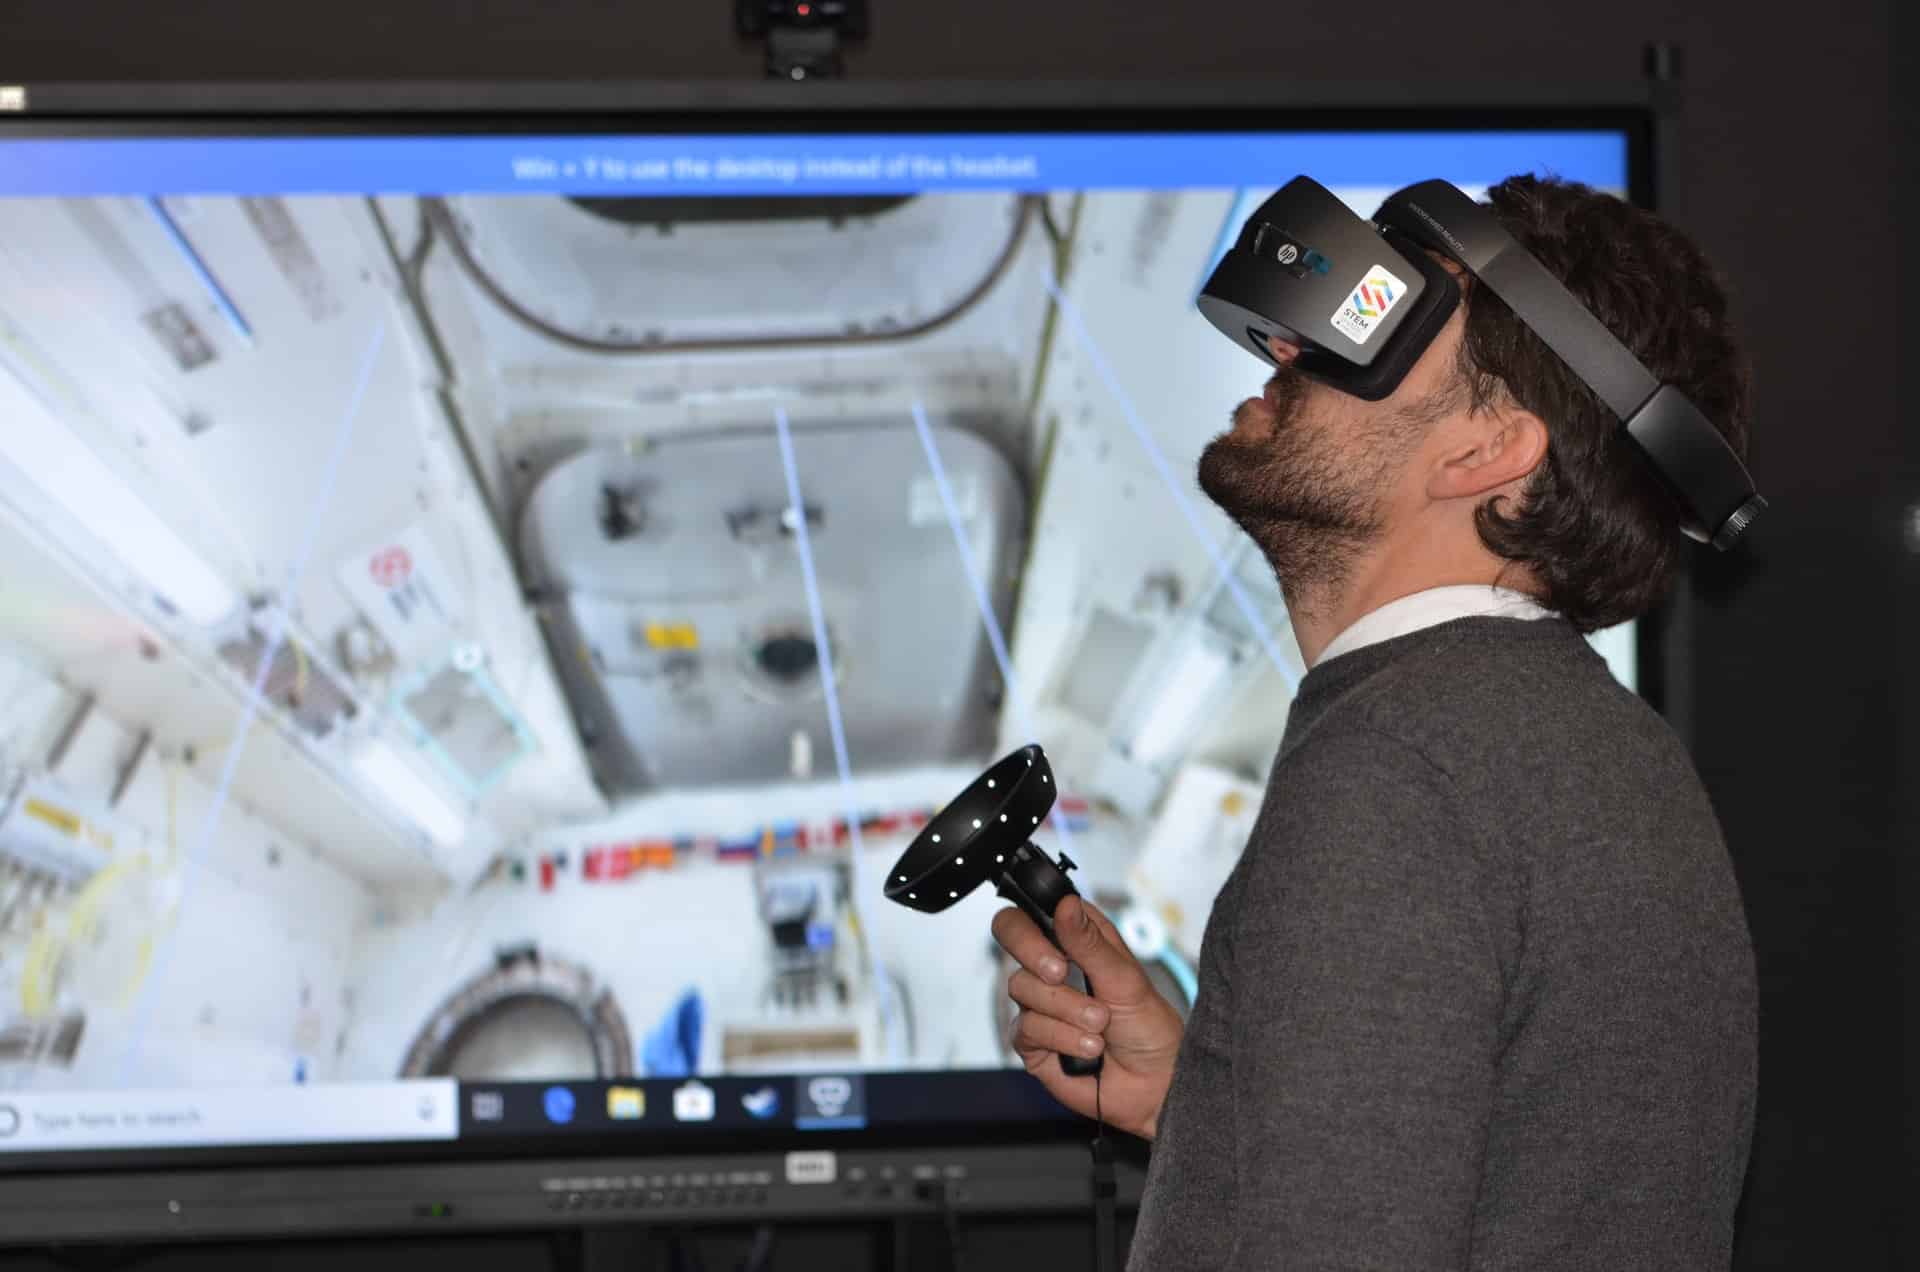 White man with a beard wears a VR headset and holds a controller while standing in front of a screen showing a space capsule.